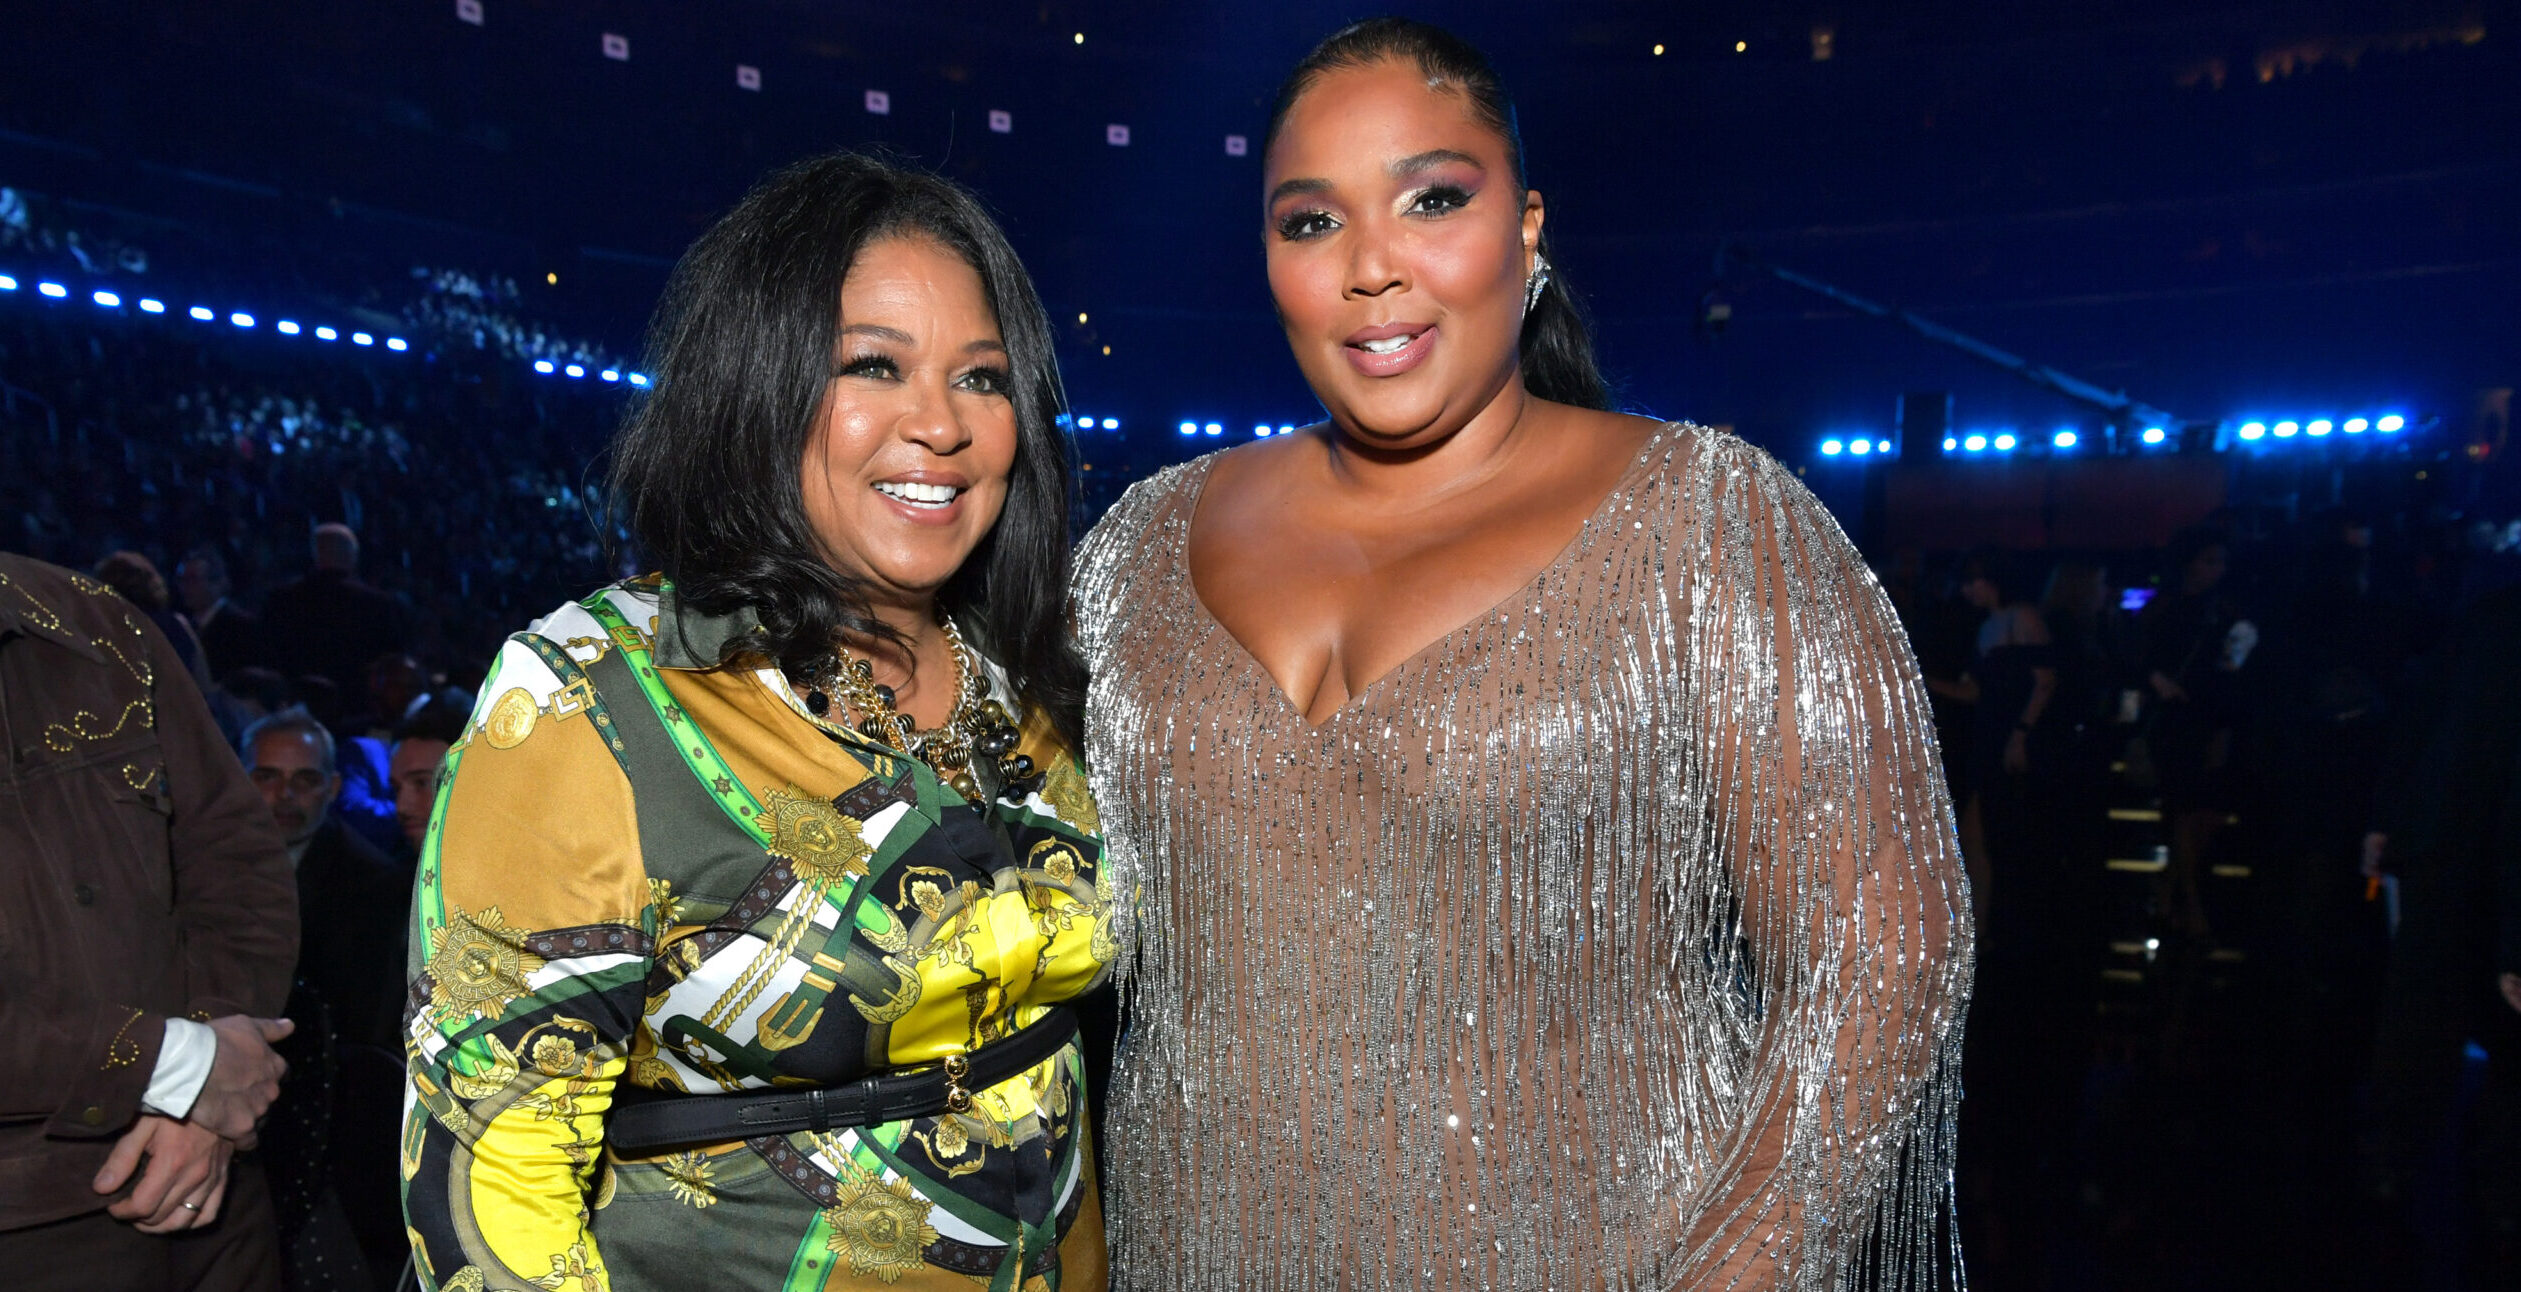 Lizzo Shares An Adorable Video With Her Mom: ‘She Always Made Me Feel Special’